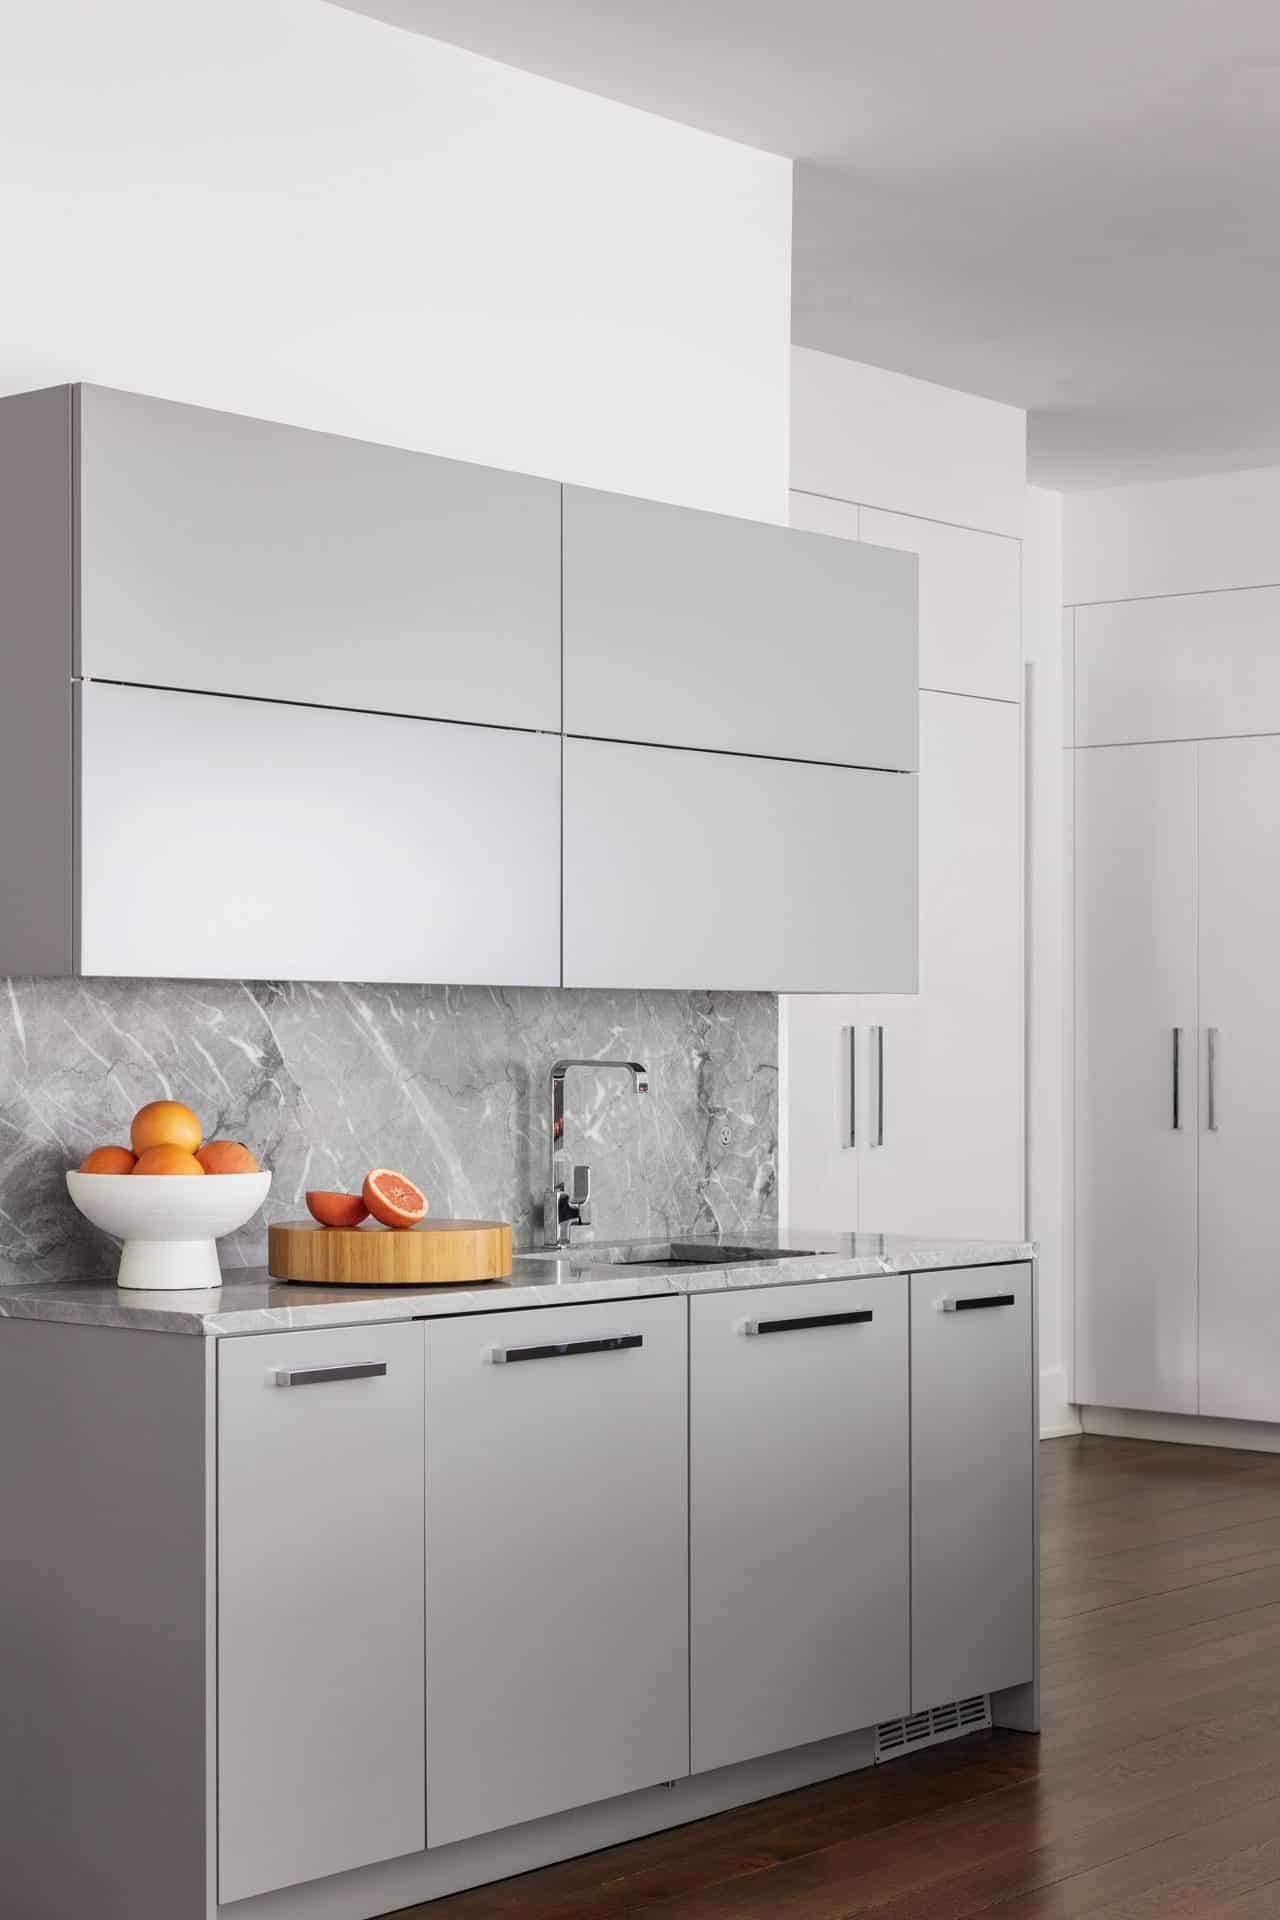 Contemporary kitchen with gray and white flat-panel cabinets. The countertops and backsplash are gray marble.